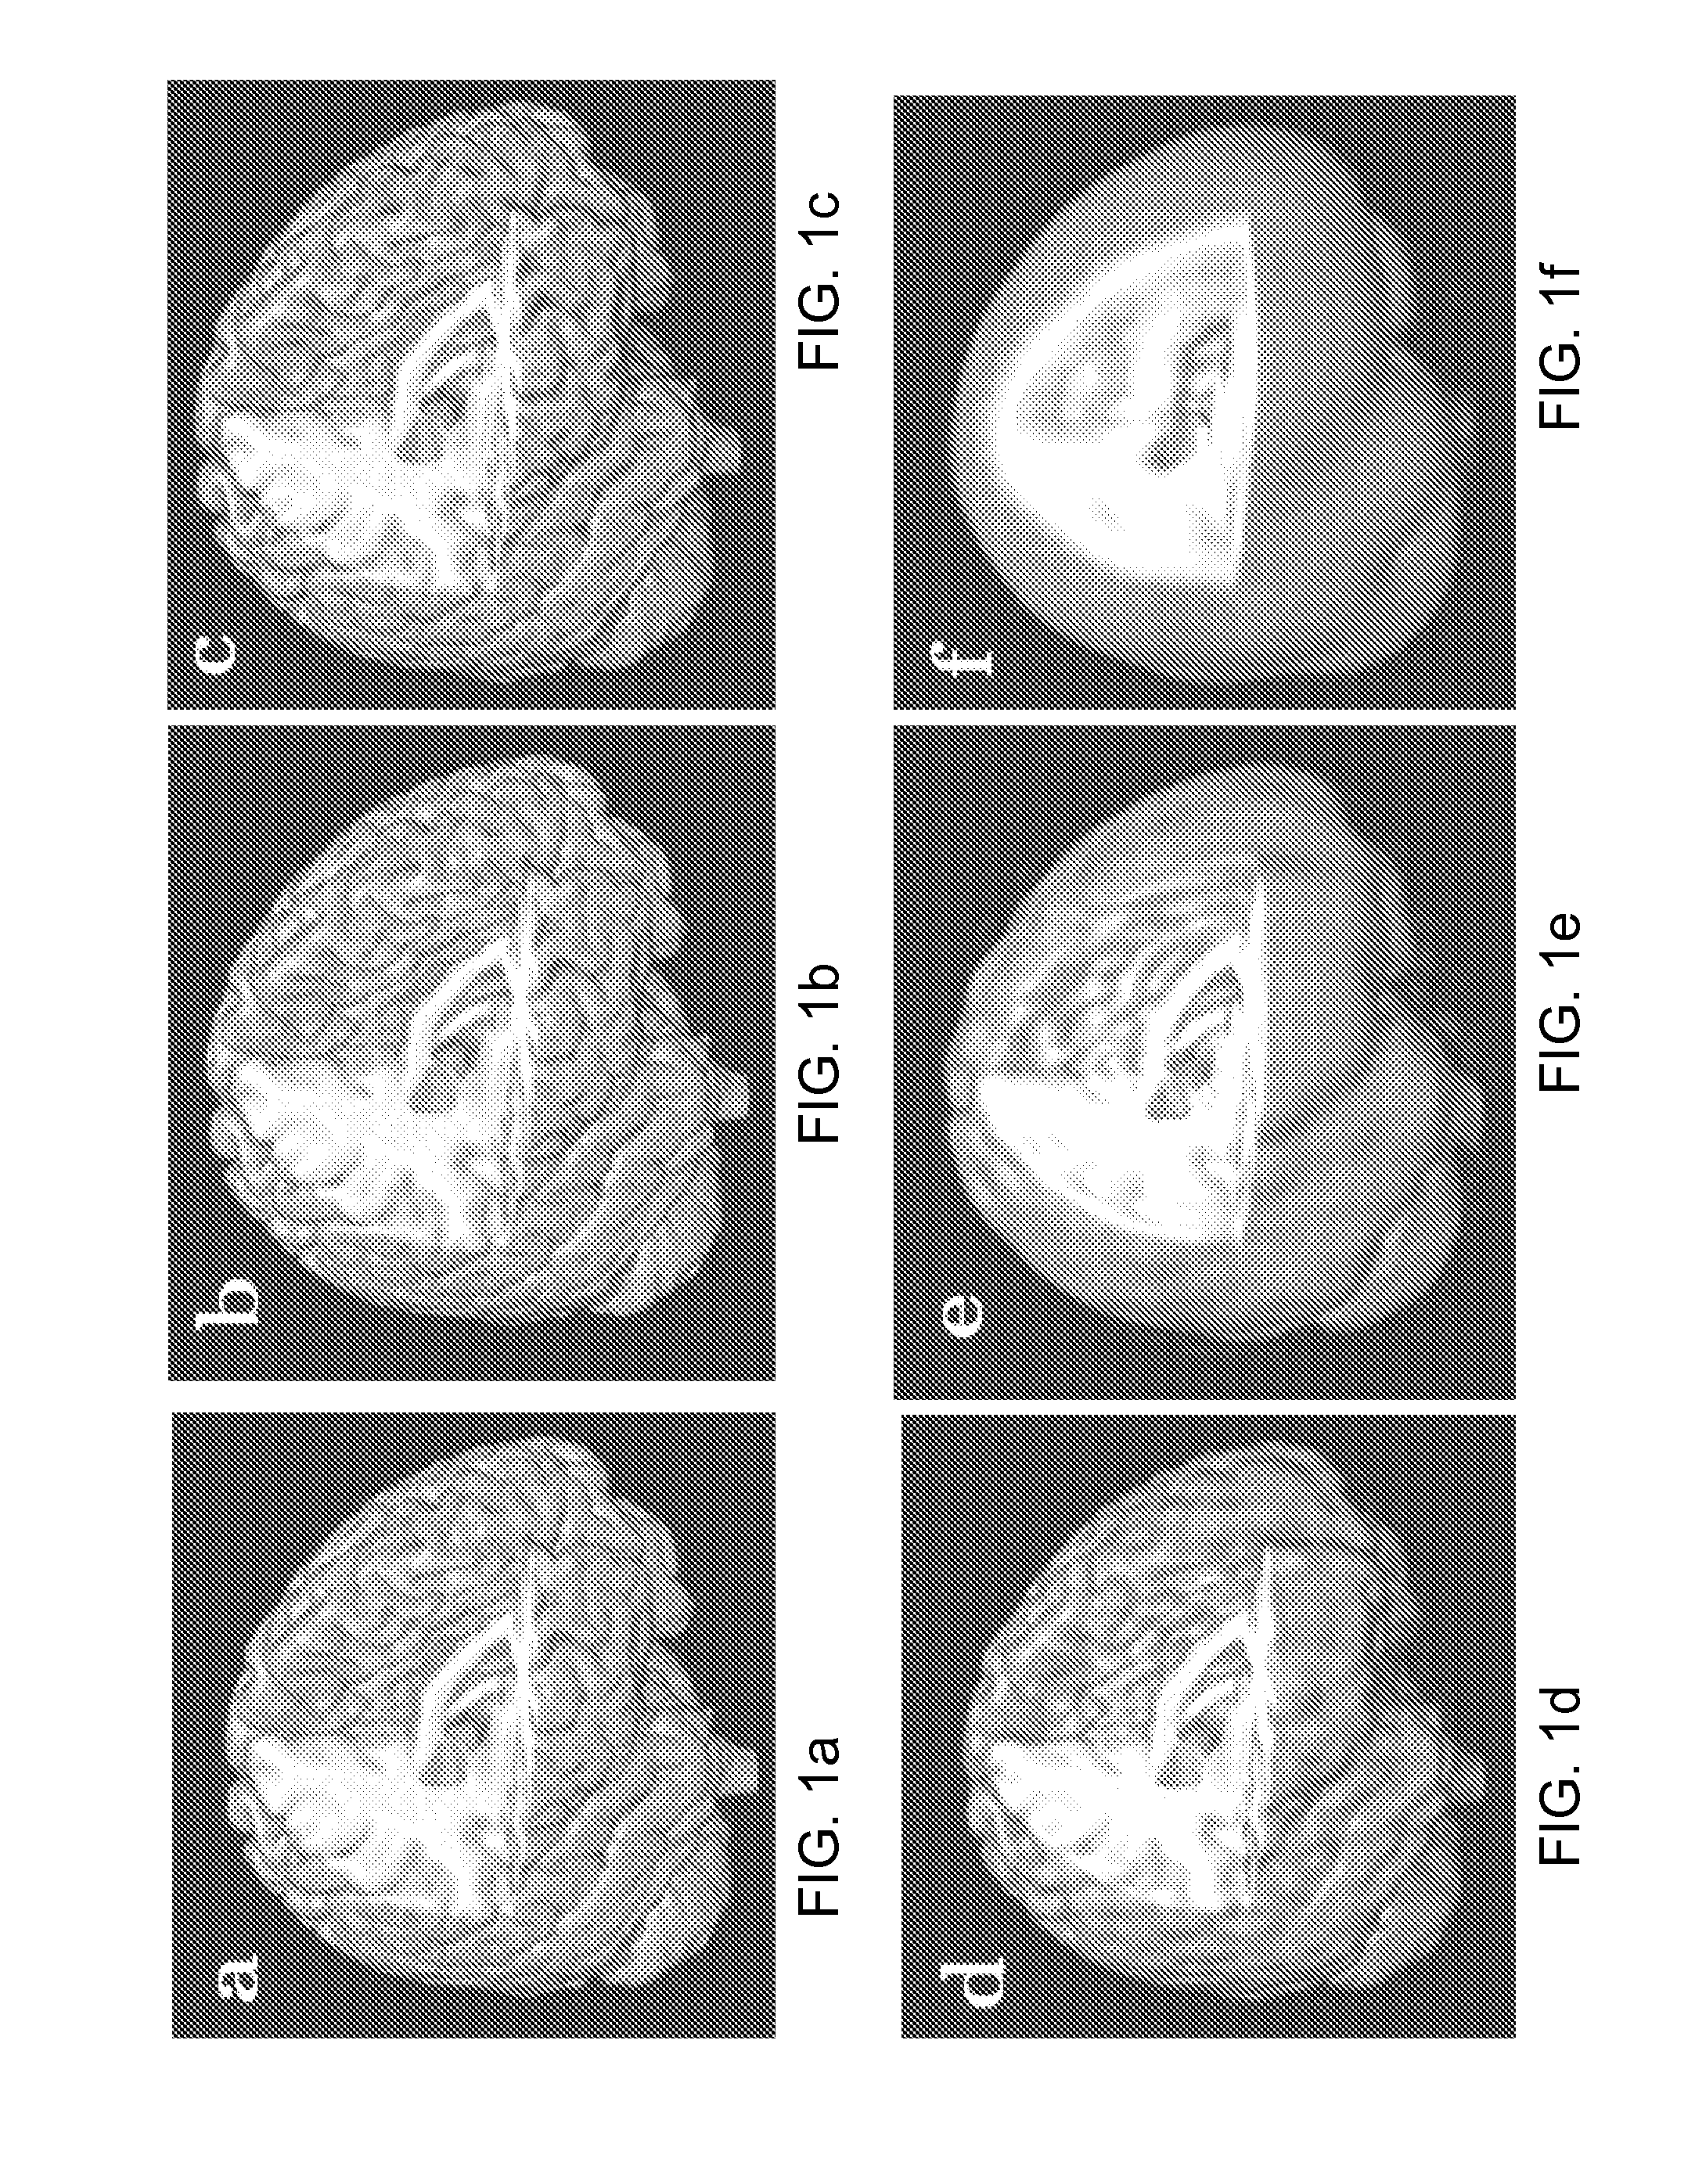 Method and system for analysis of volumetric data